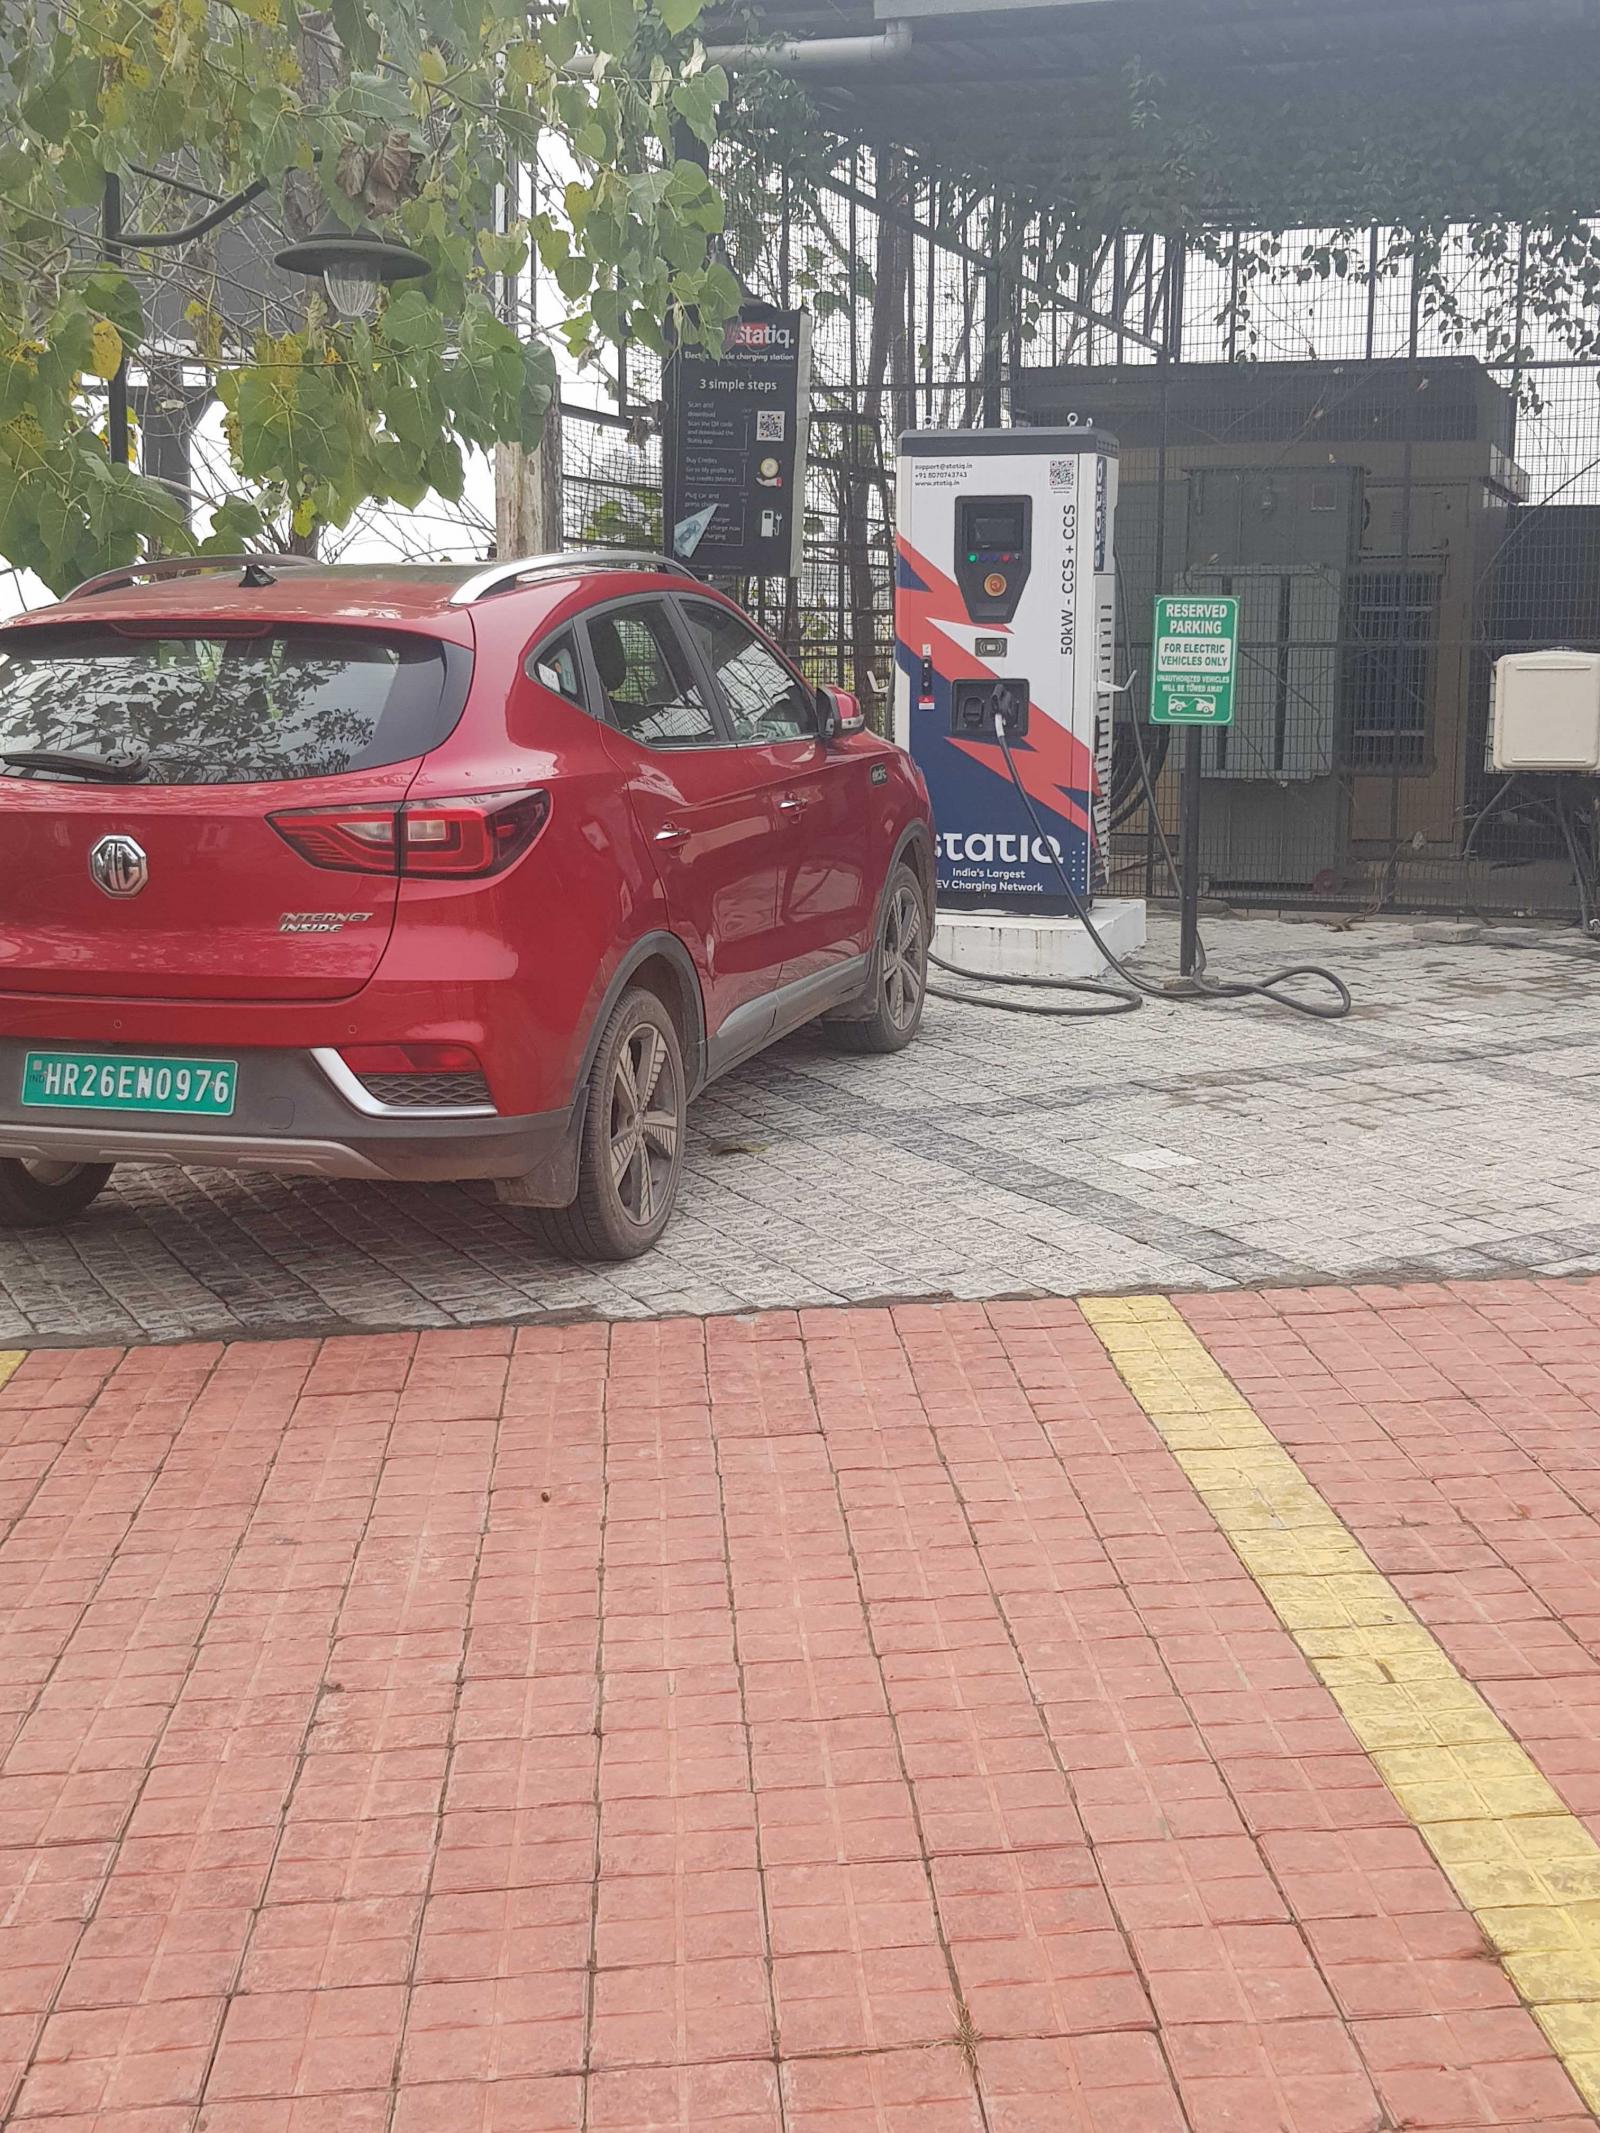 Comments On Statiq Plans To Invest 40 Cr In EV Charging Infra In 